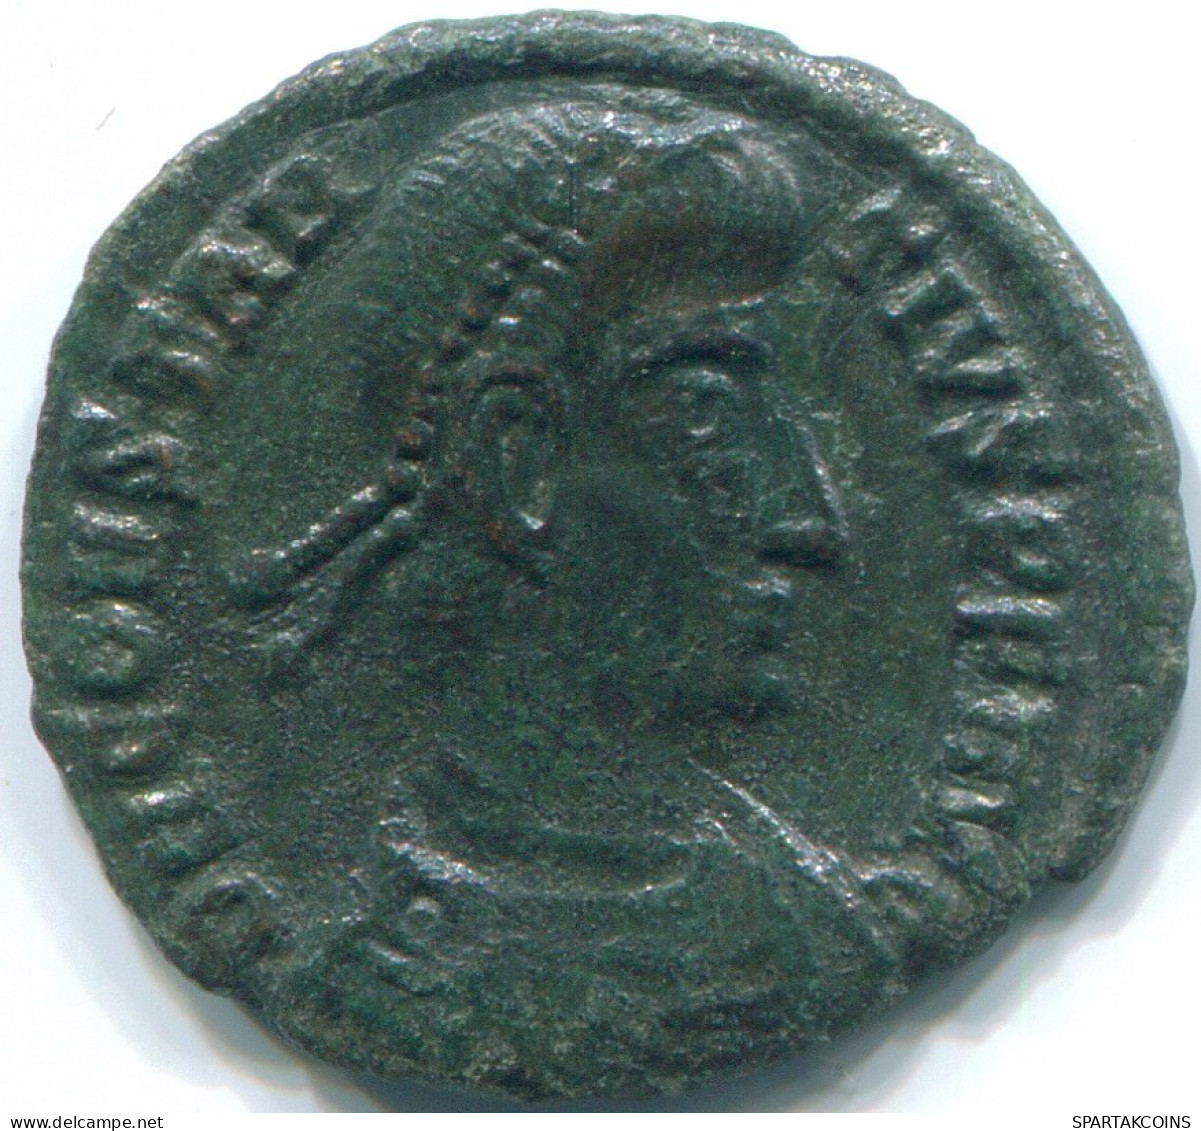 CONSTANTIUS II Cyzicus Mint AD 351-355 Soldier 2.08g/18mm #ROM1009.8.E.A - The Christian Empire (307 AD Tot 363 AD)